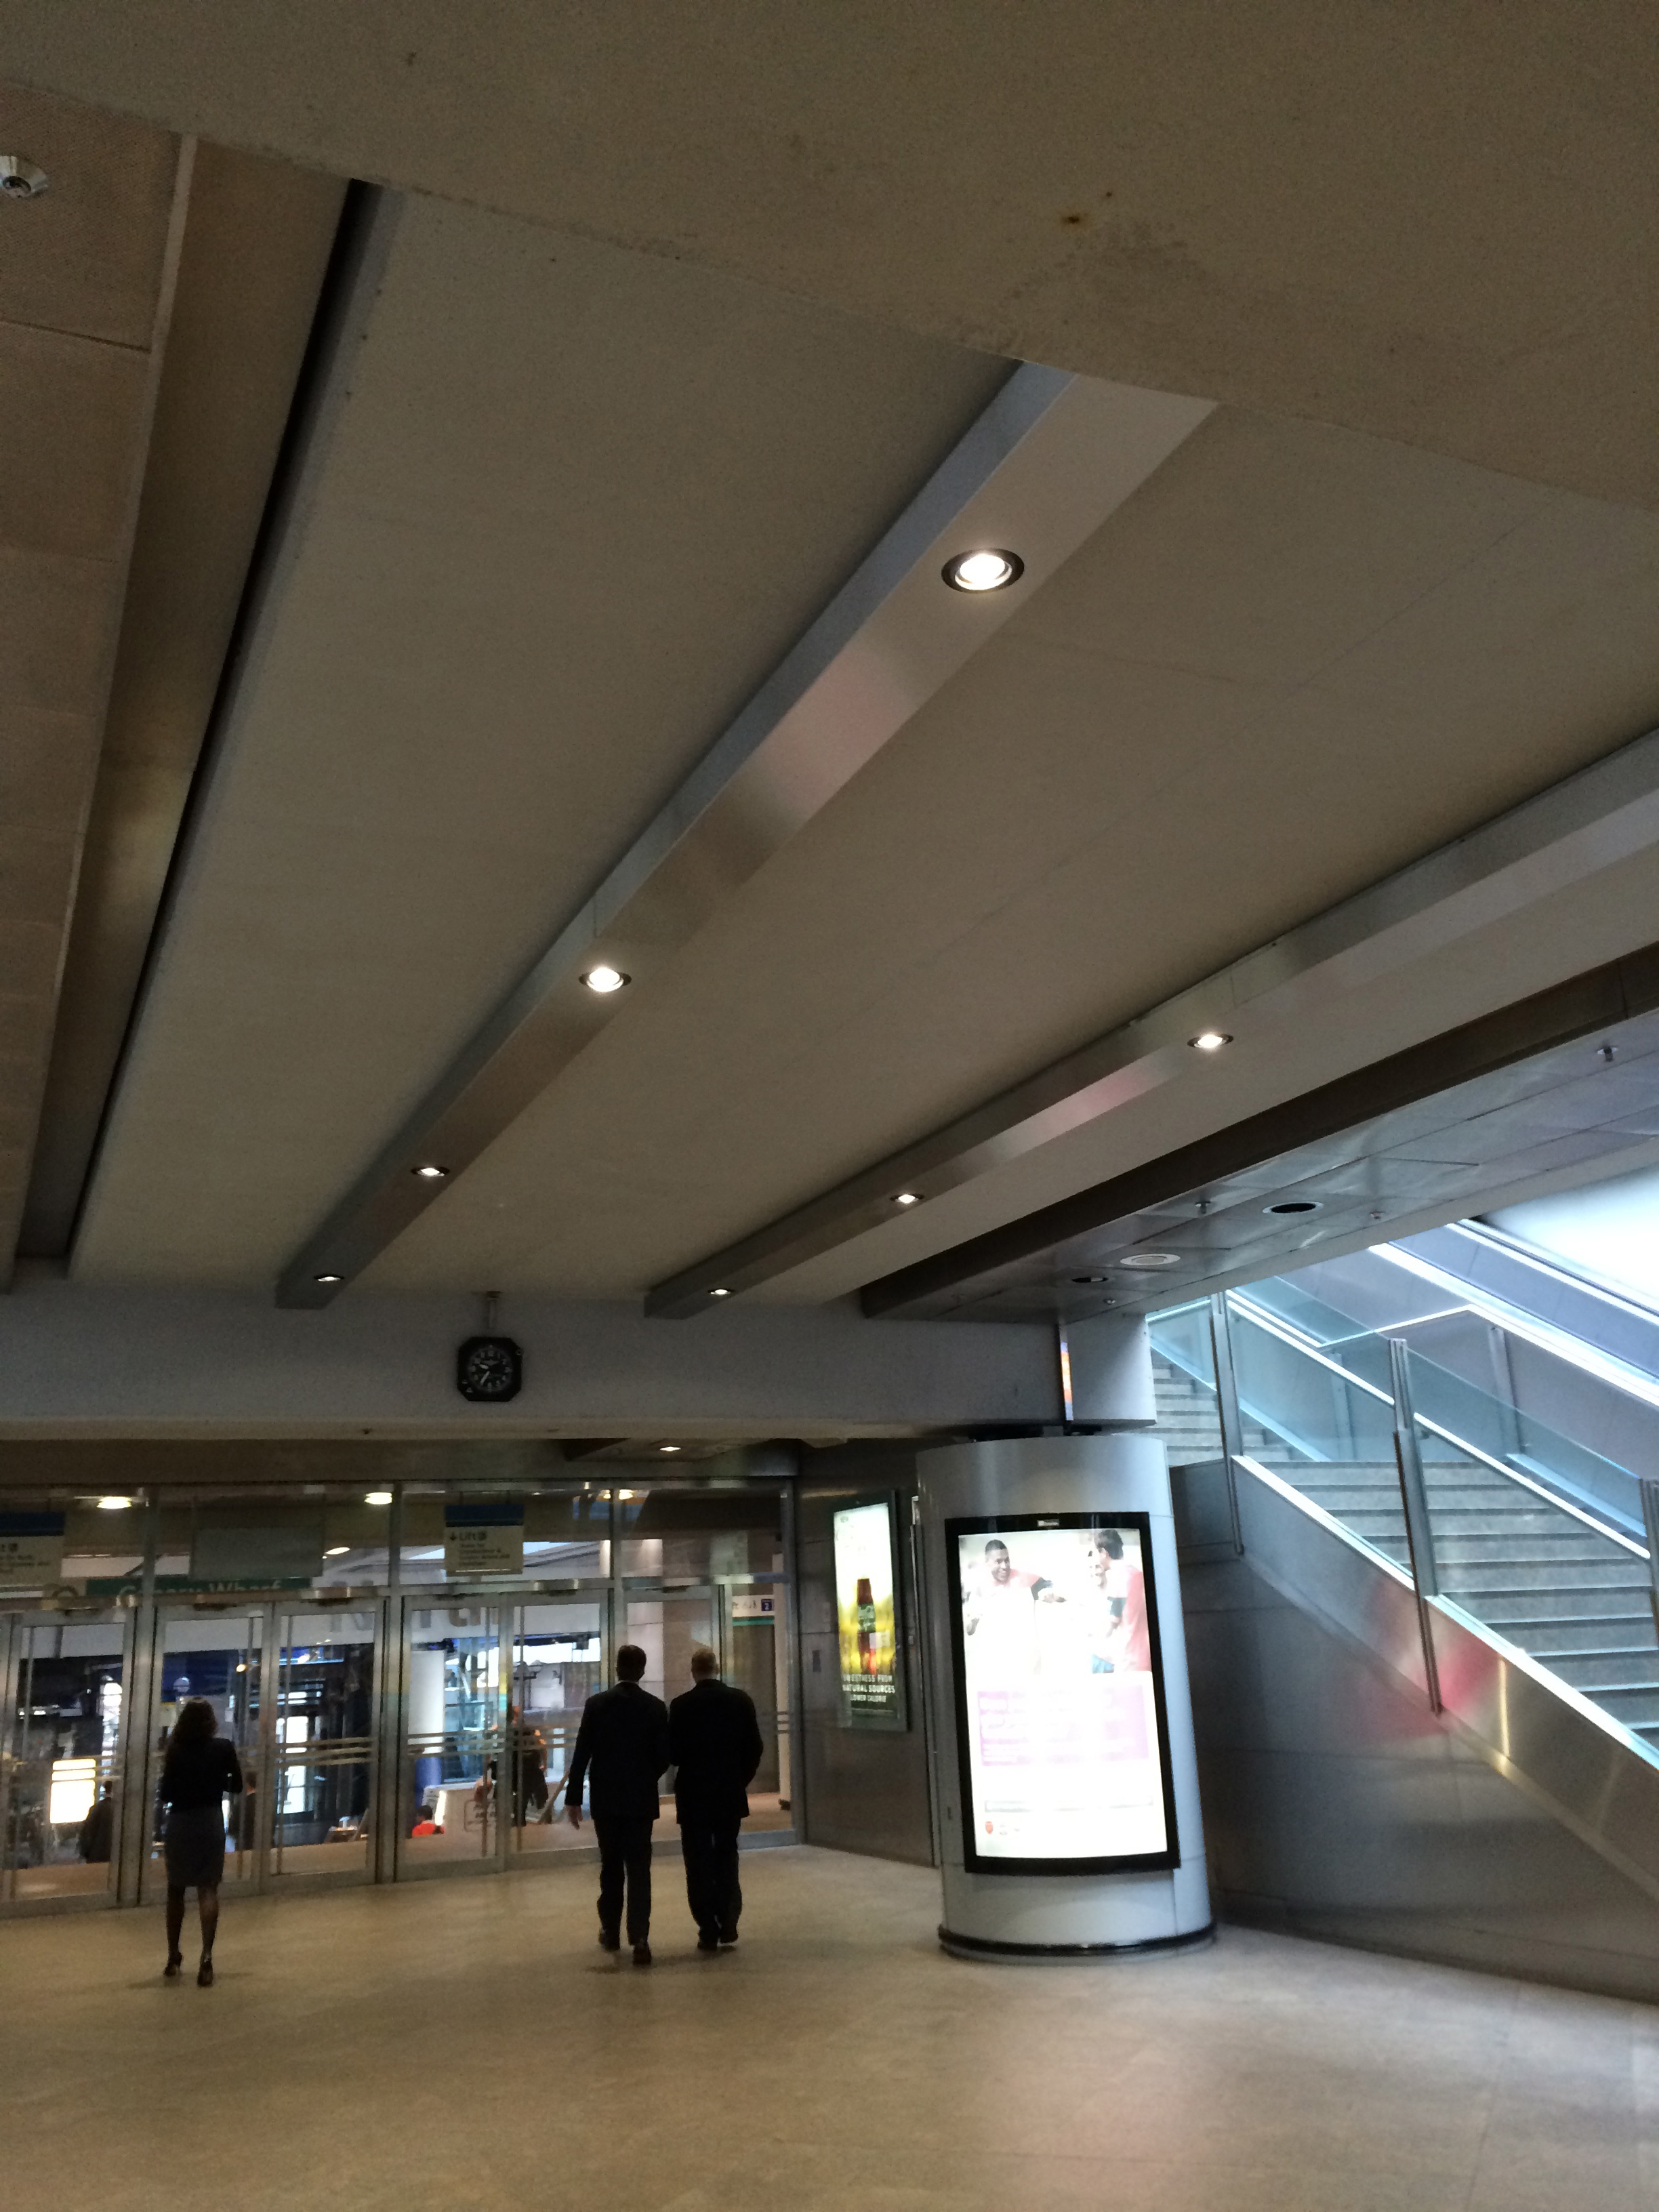 Canary Wharf Station interior, BORDO 150 with gimbal downlighters